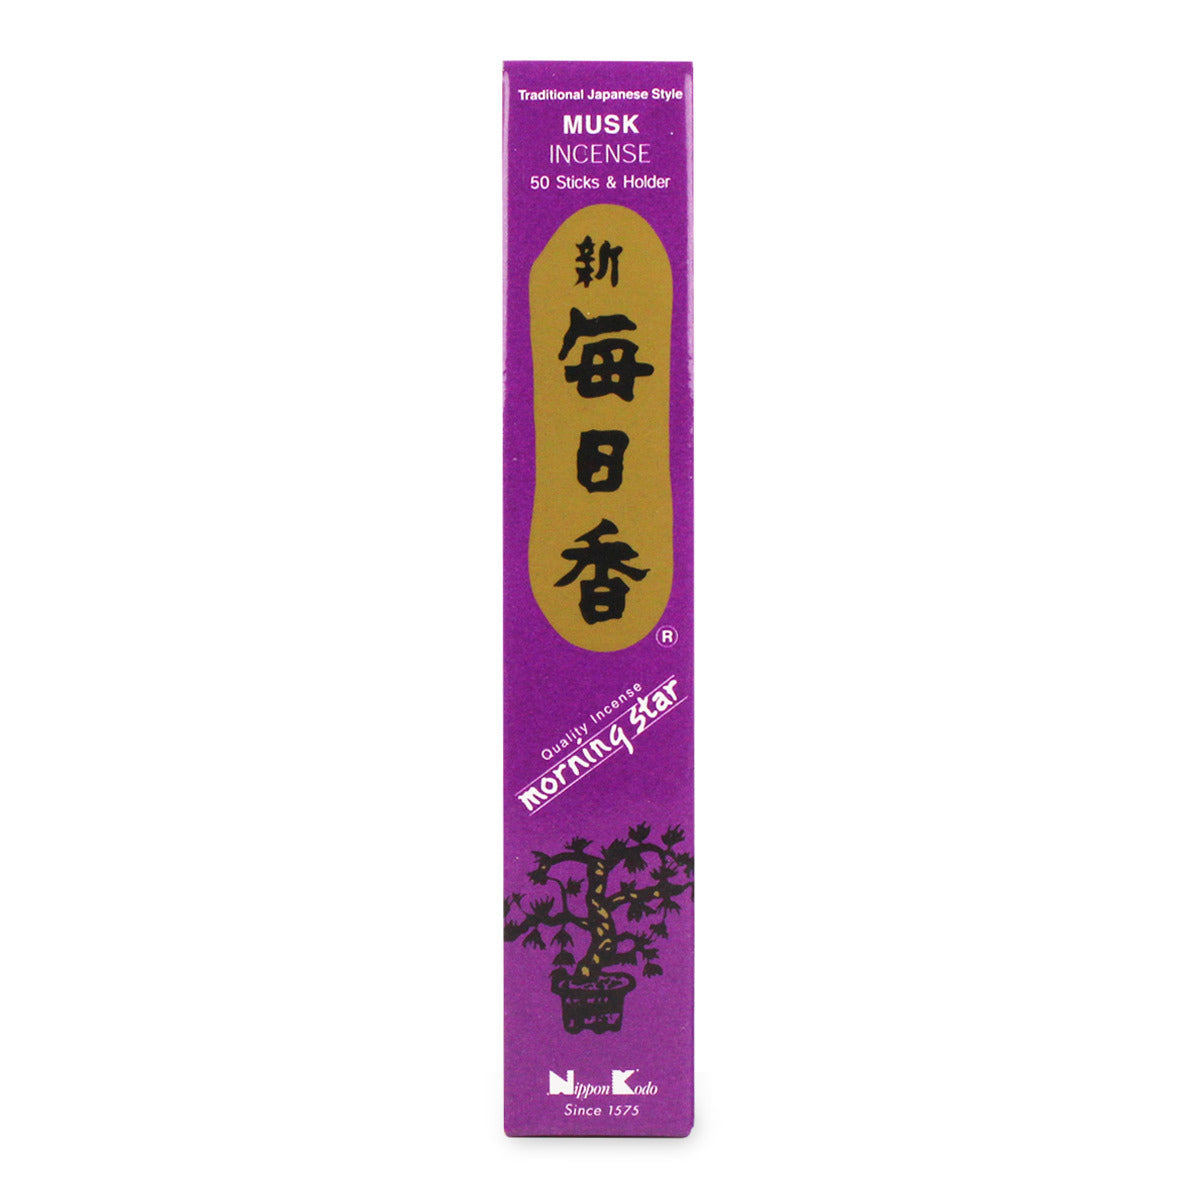 Primary image of Musk Incense